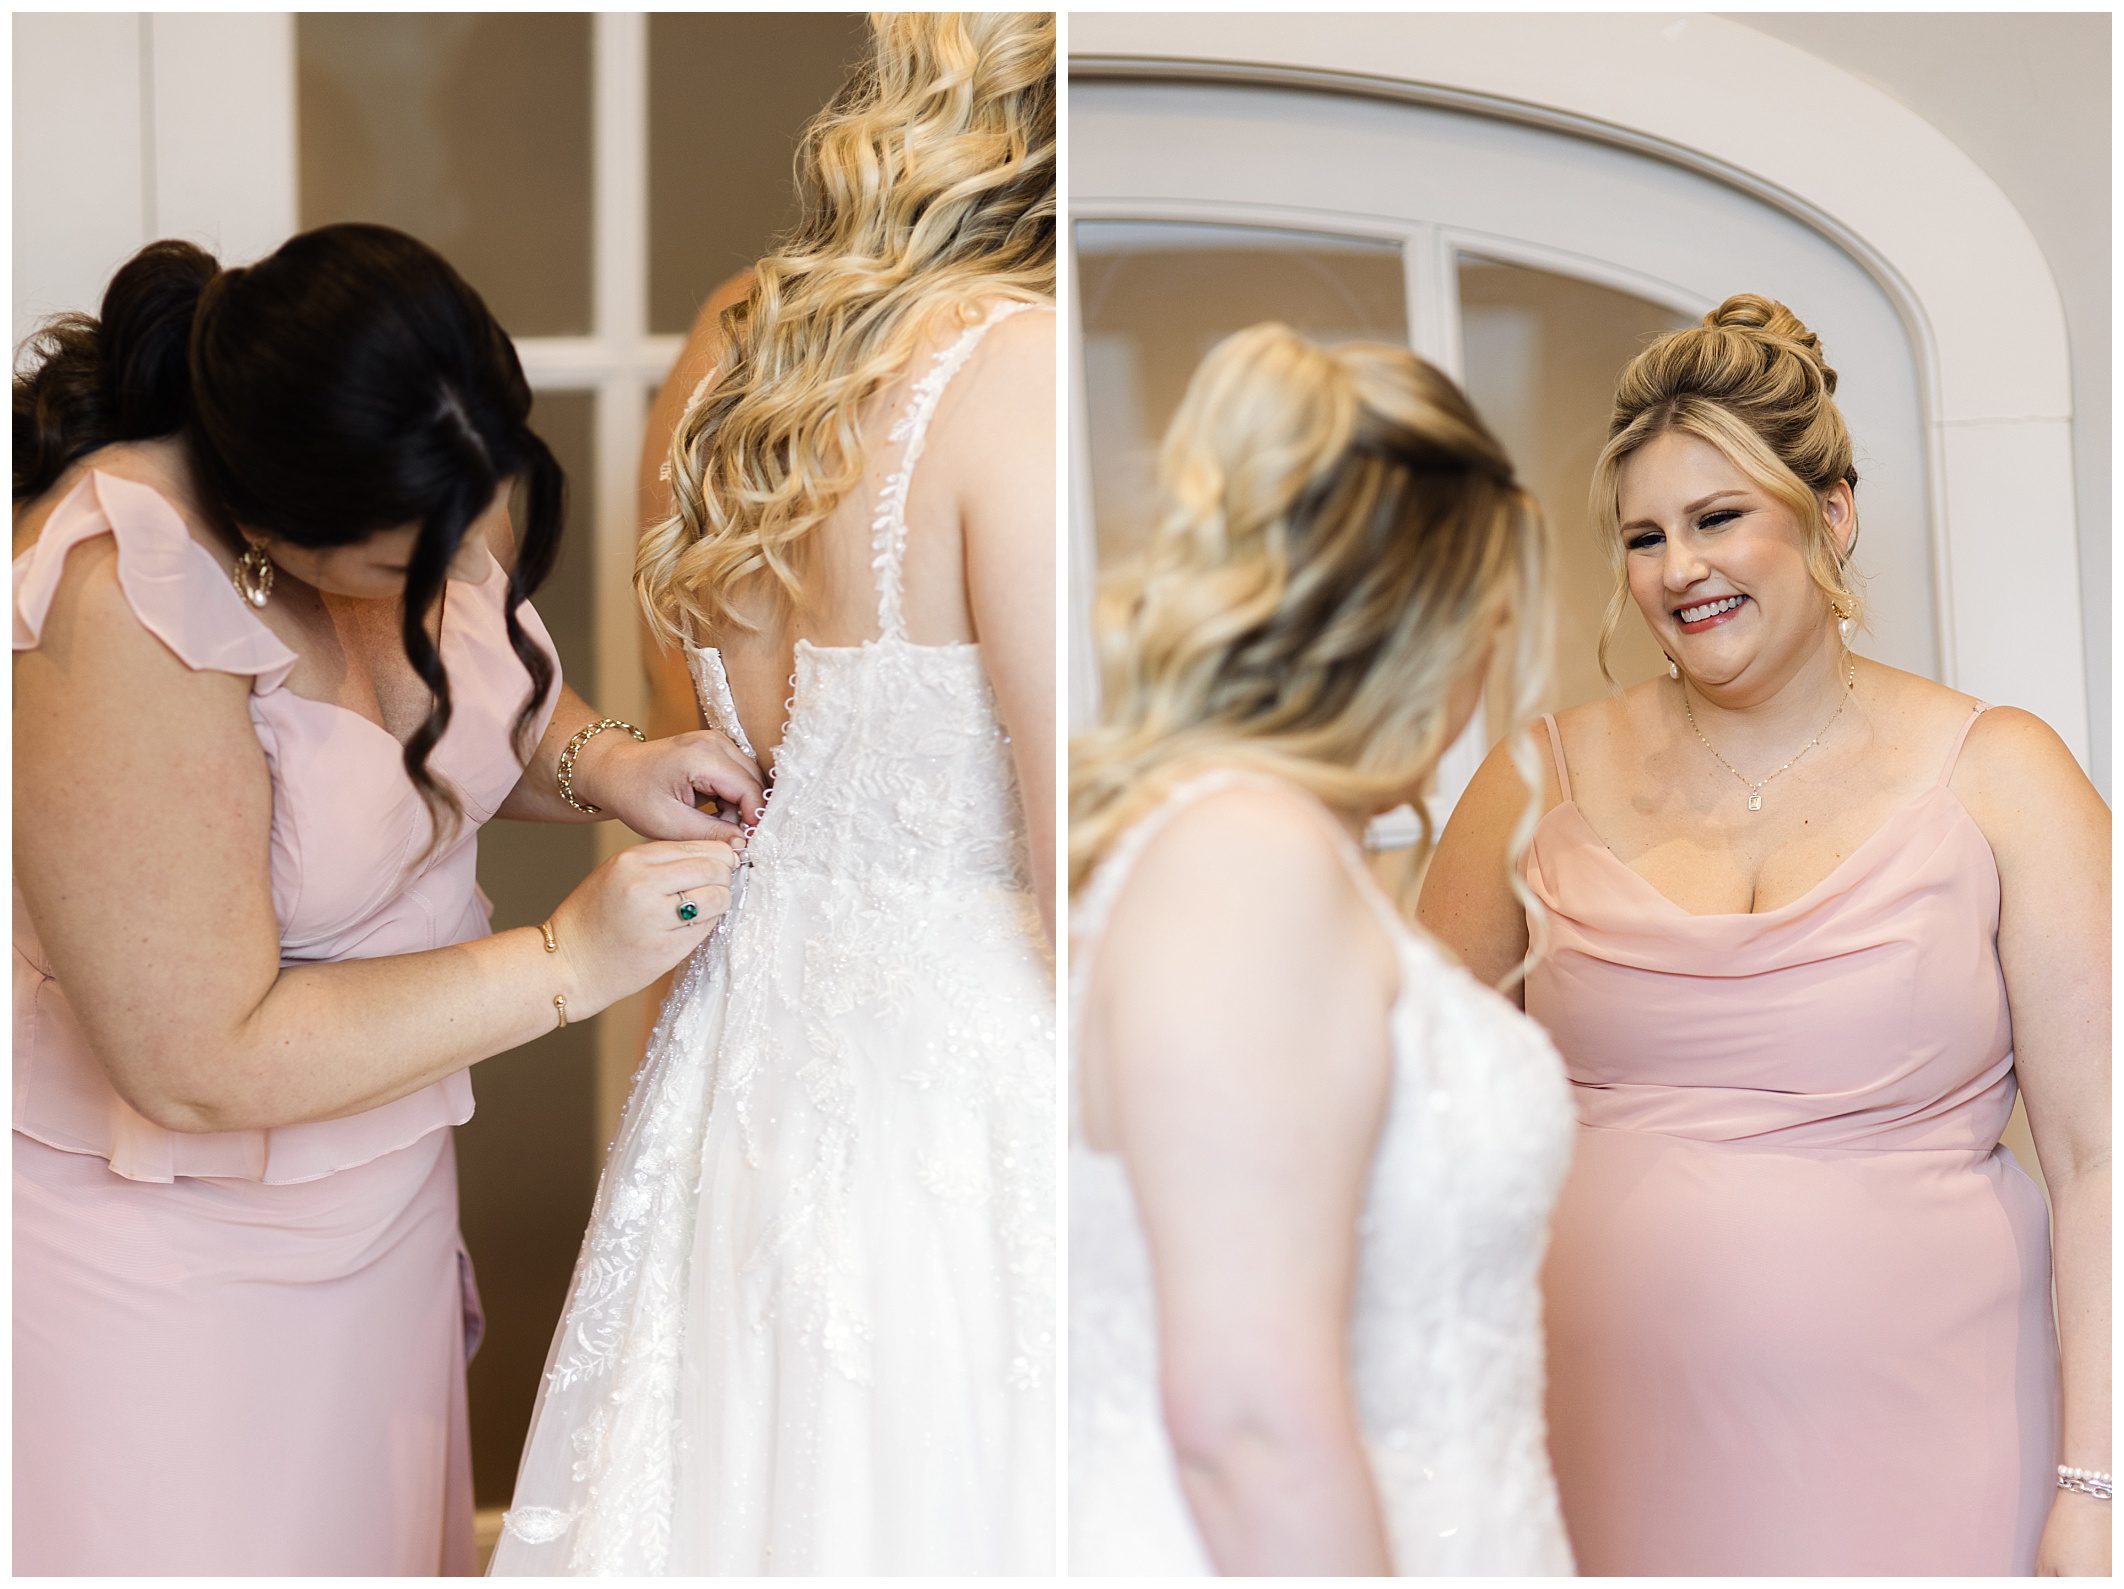 Two women in pink dresses help a smiling bride in a white gown get dressed for her mountain wedding, indoors in a brightly lit room with arched windows.